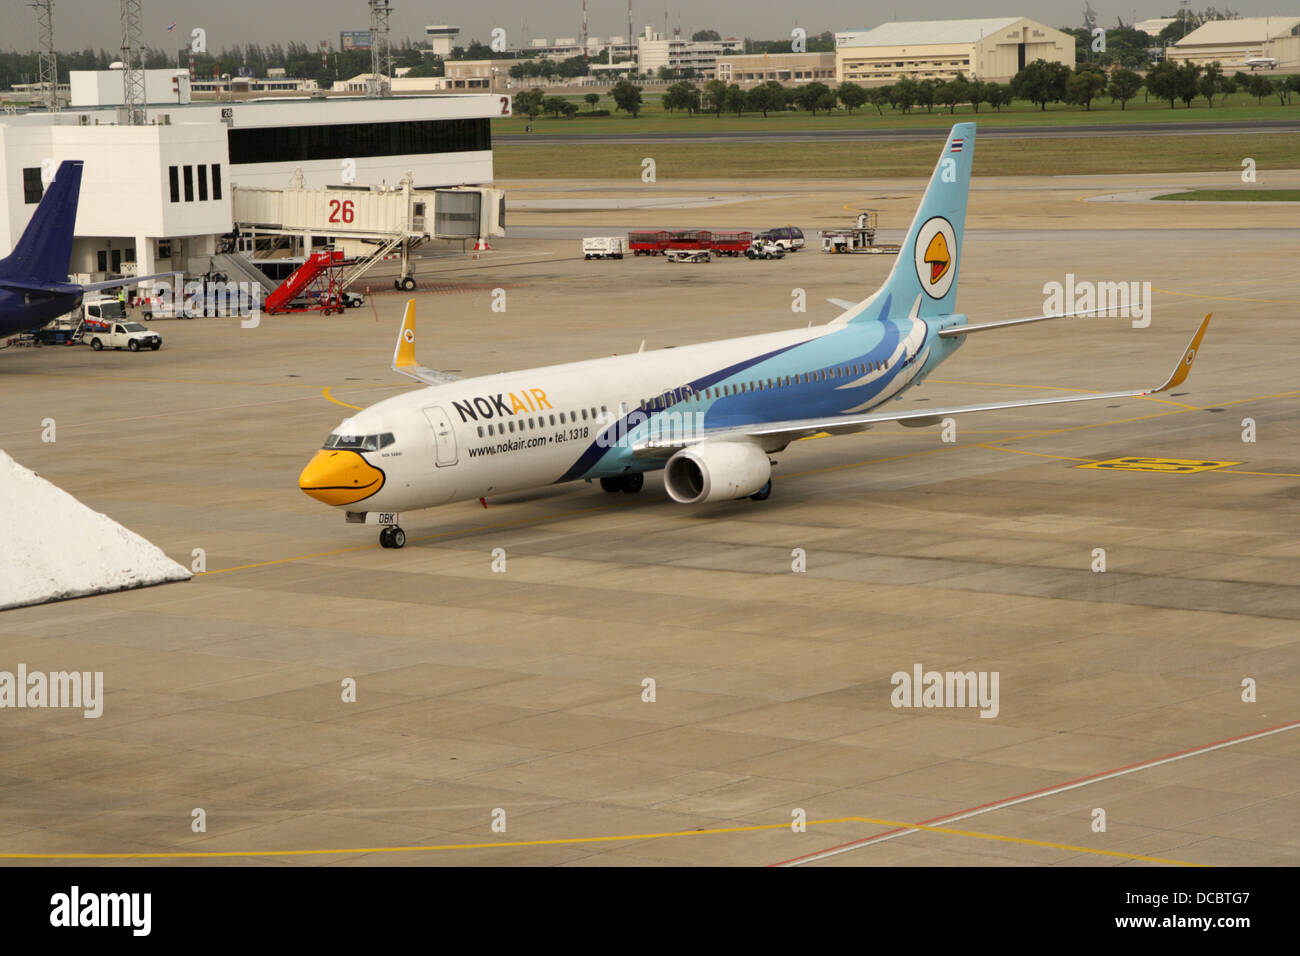 Low cost airline Nok Air parking at Don Muang airport Stock Photo